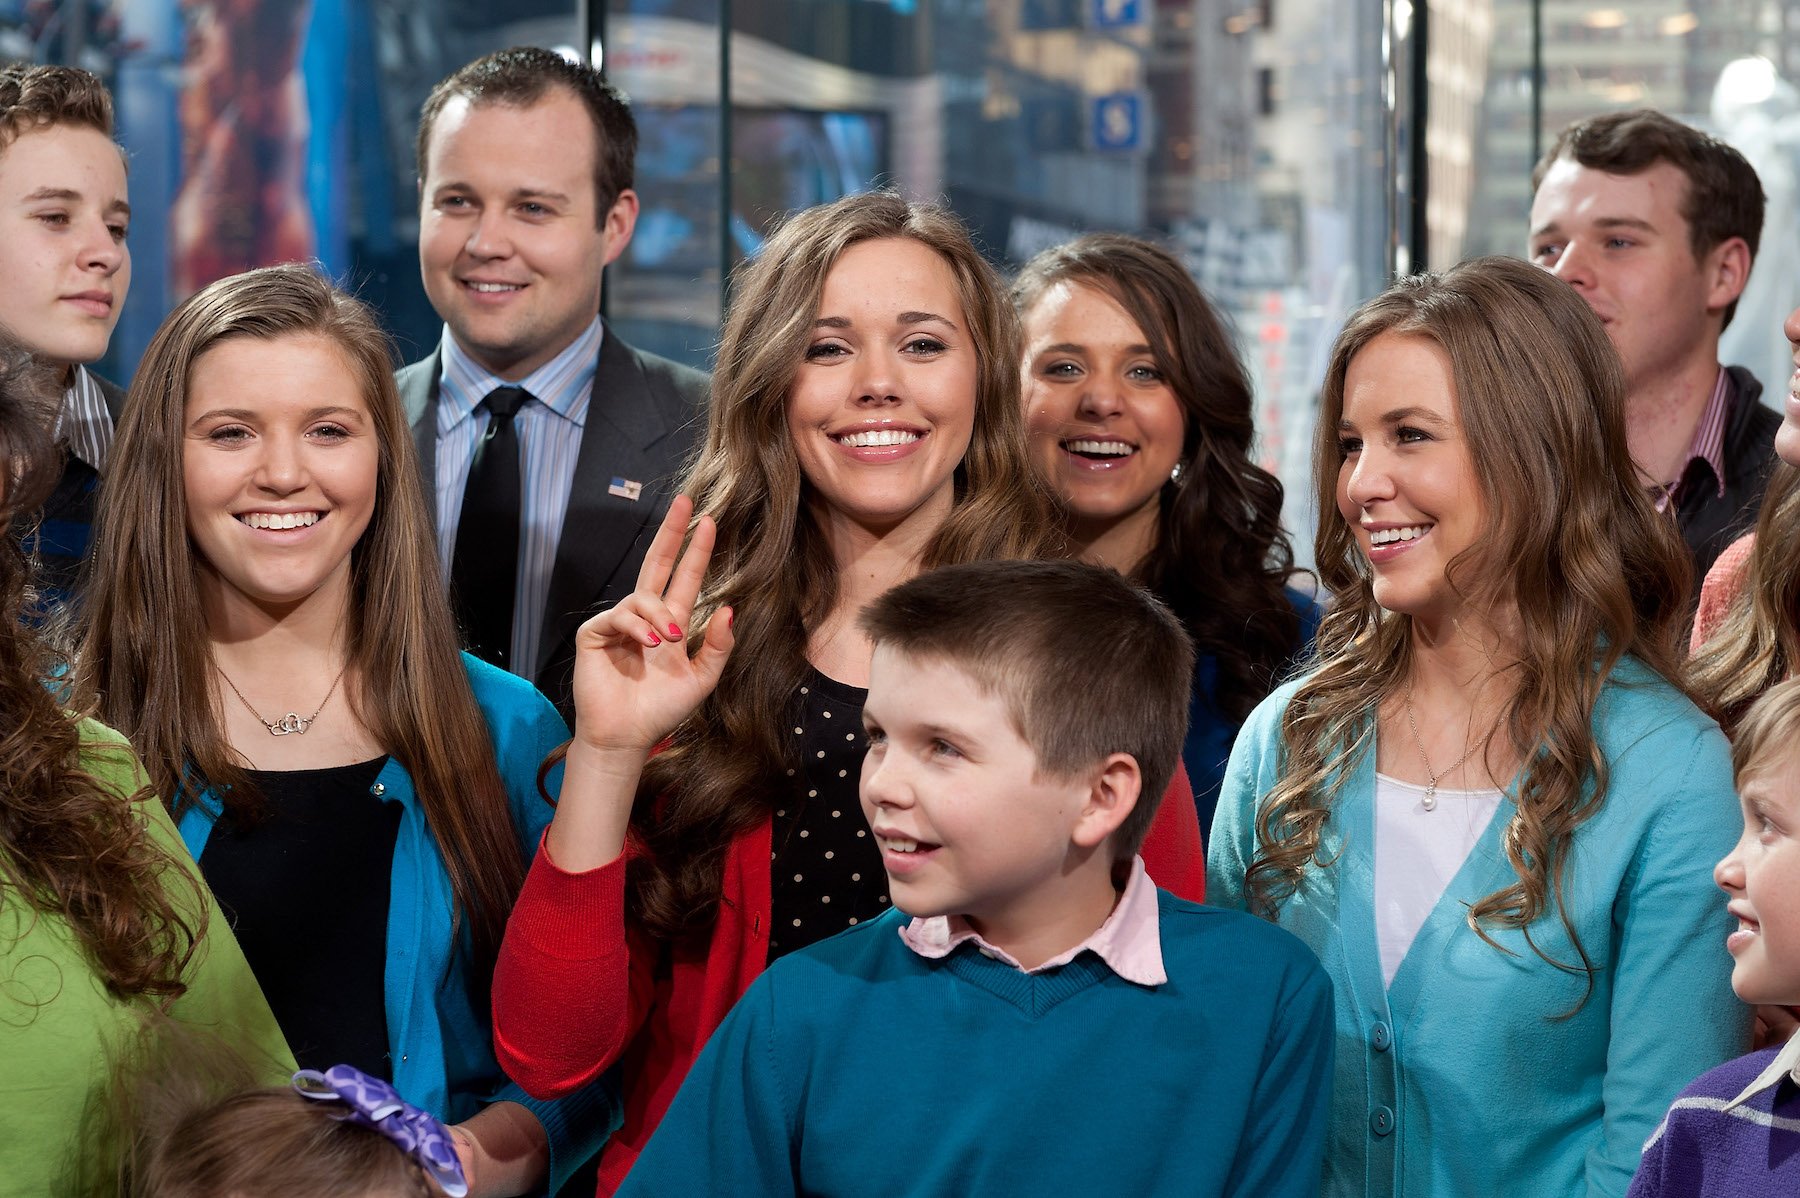 Jessa Duggar smiling and holding up a peace sign with her fingers while surrounded by the rest of the Duggar family while on the set of 'Extra'